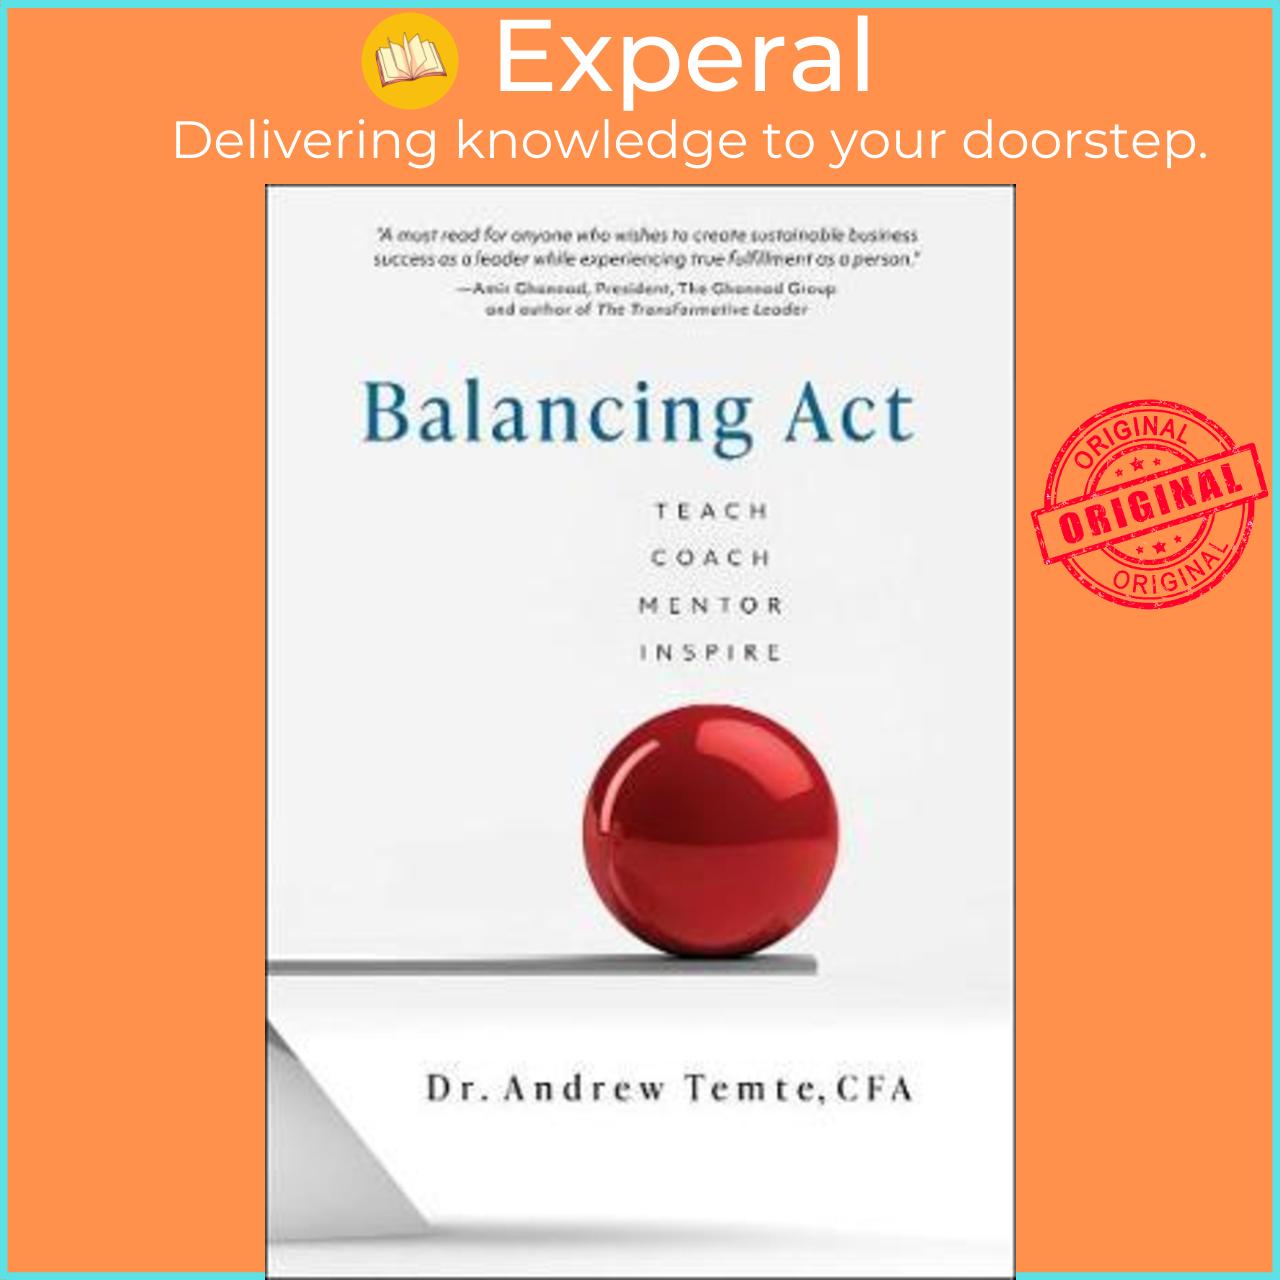 Sách - Balancing Act : Teach Coach Mentor Inspire by Andrew Temte (US edition, hardcover)